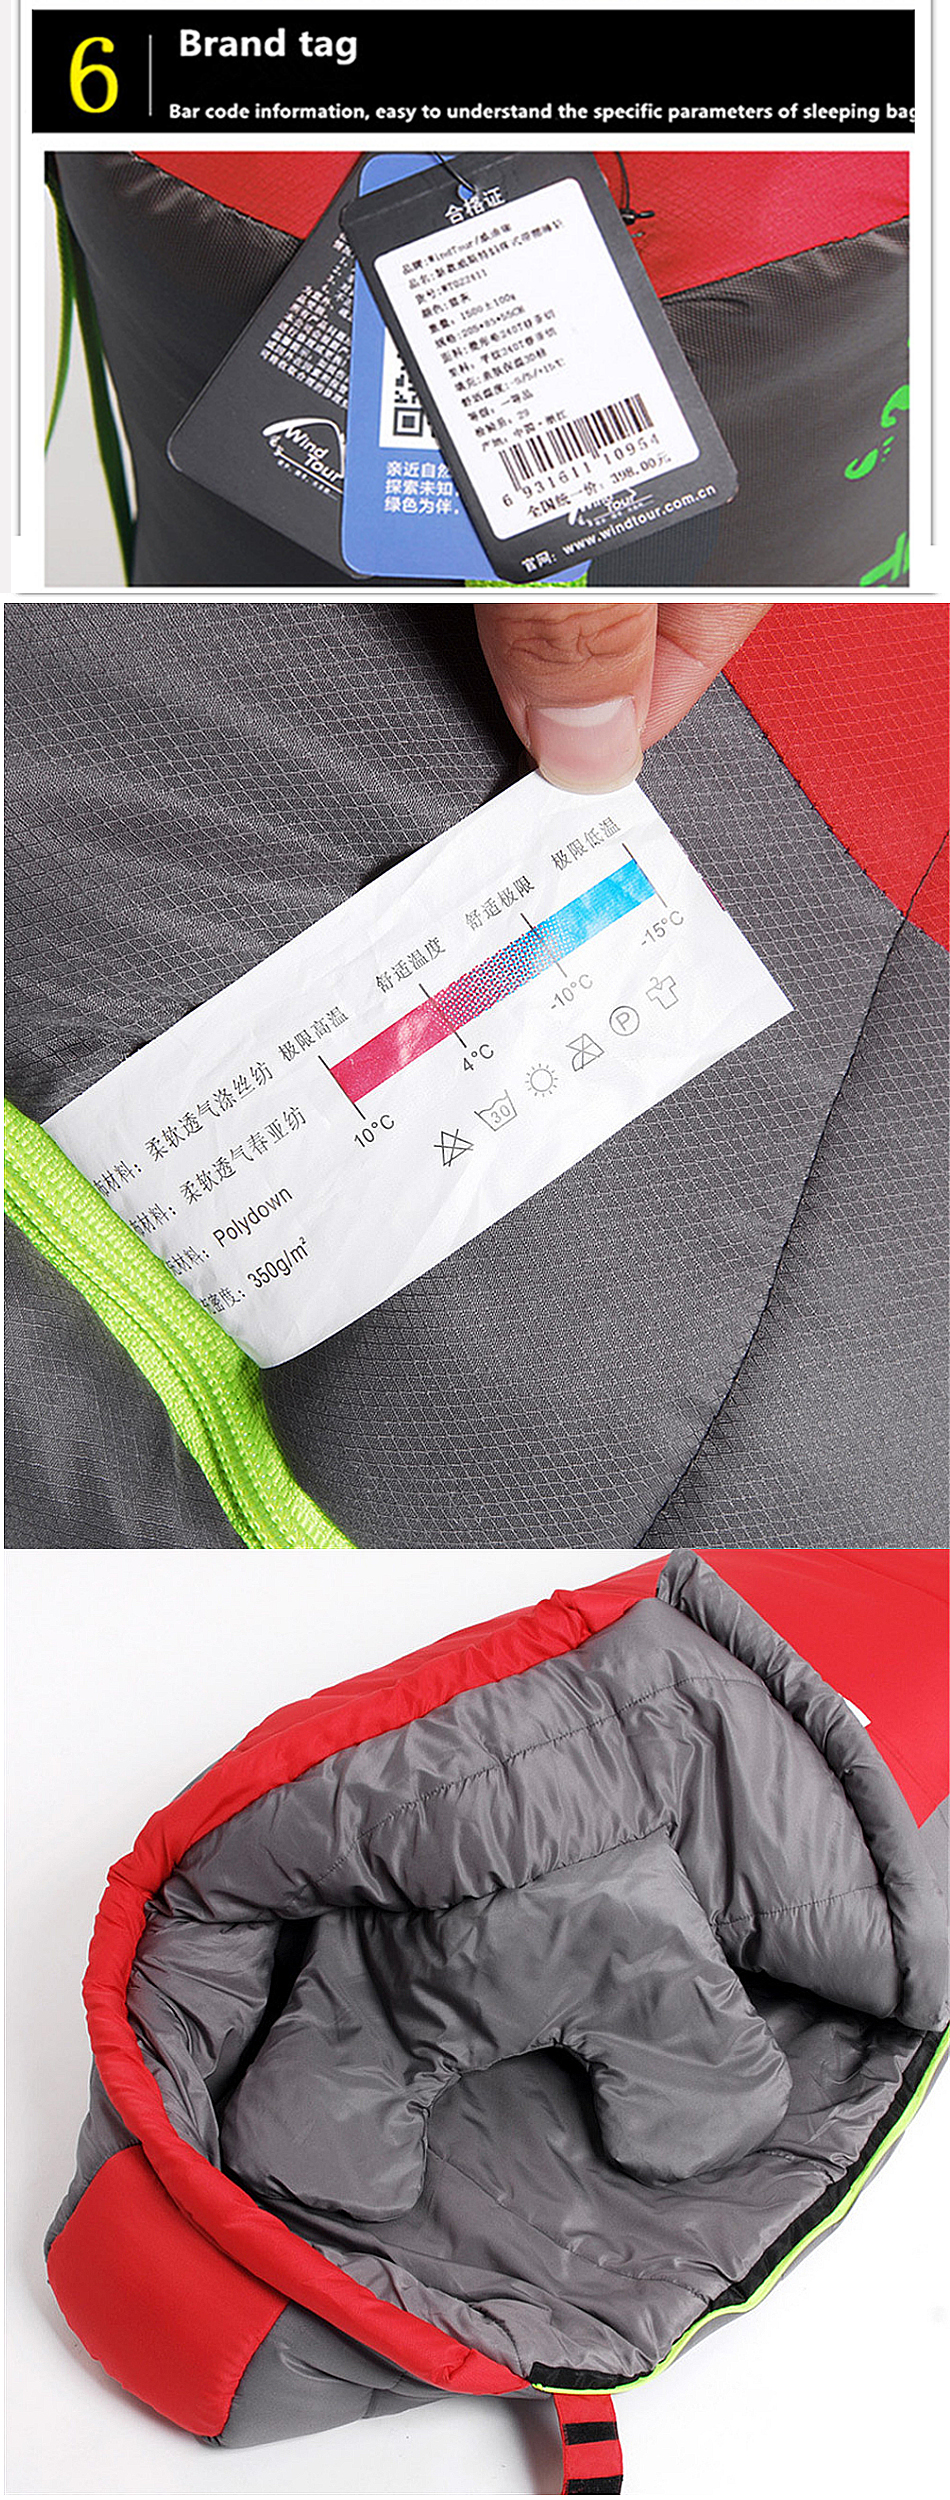 WIND-TOUR-Ultralight-Outdoor-Sleeping-Bag-18KG-Cotton-Hiking-Camping-Sleeping-Bag-Splicing-Thickened-1756712-4